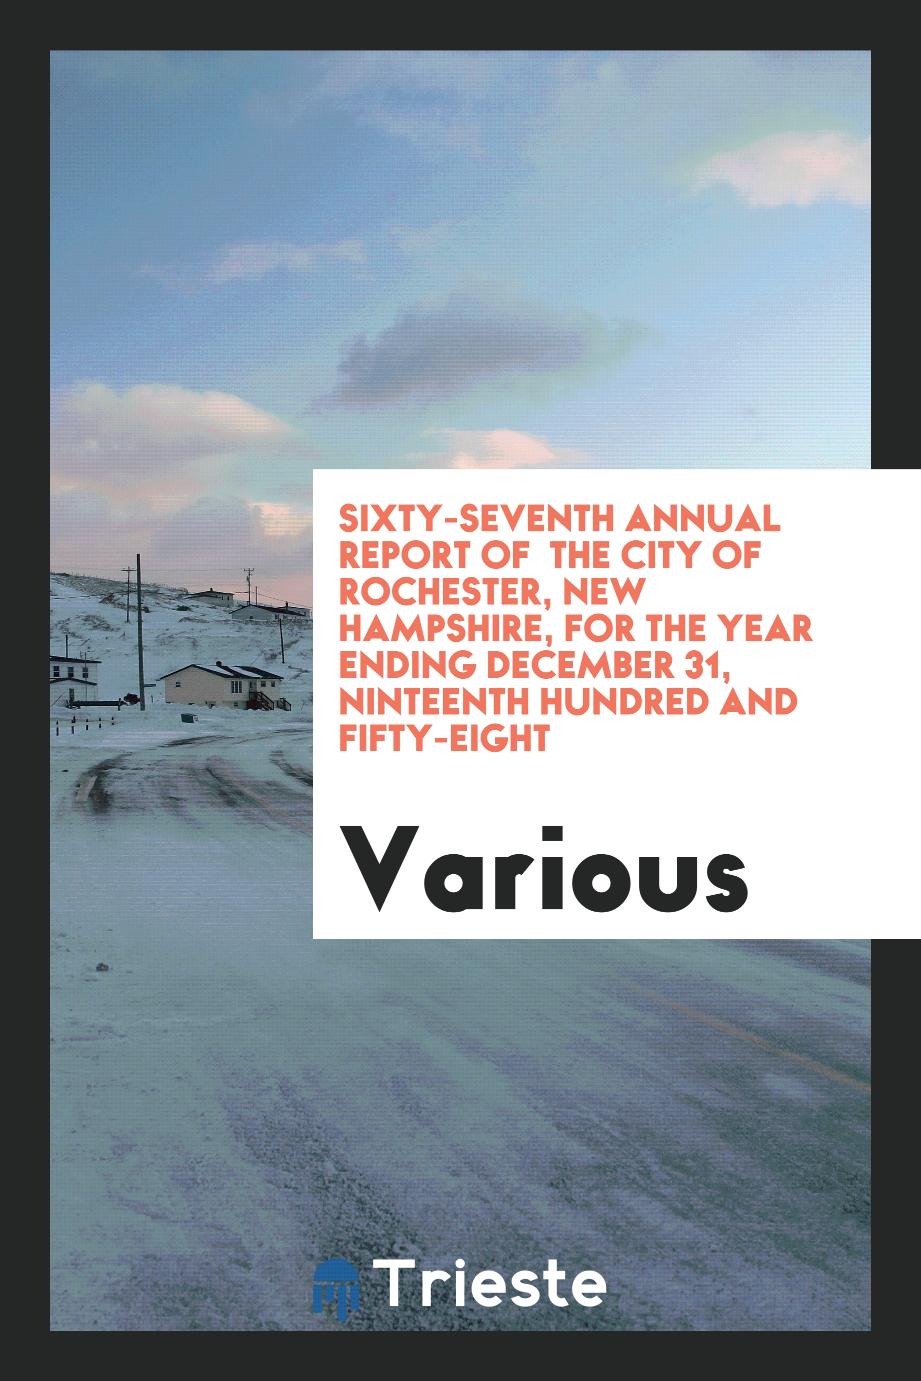 Sixty-seventh Annual report of the City of Rochester, New Hampshire, For the year ending December 31, Ninteenth Hundred and Fifty-Eight